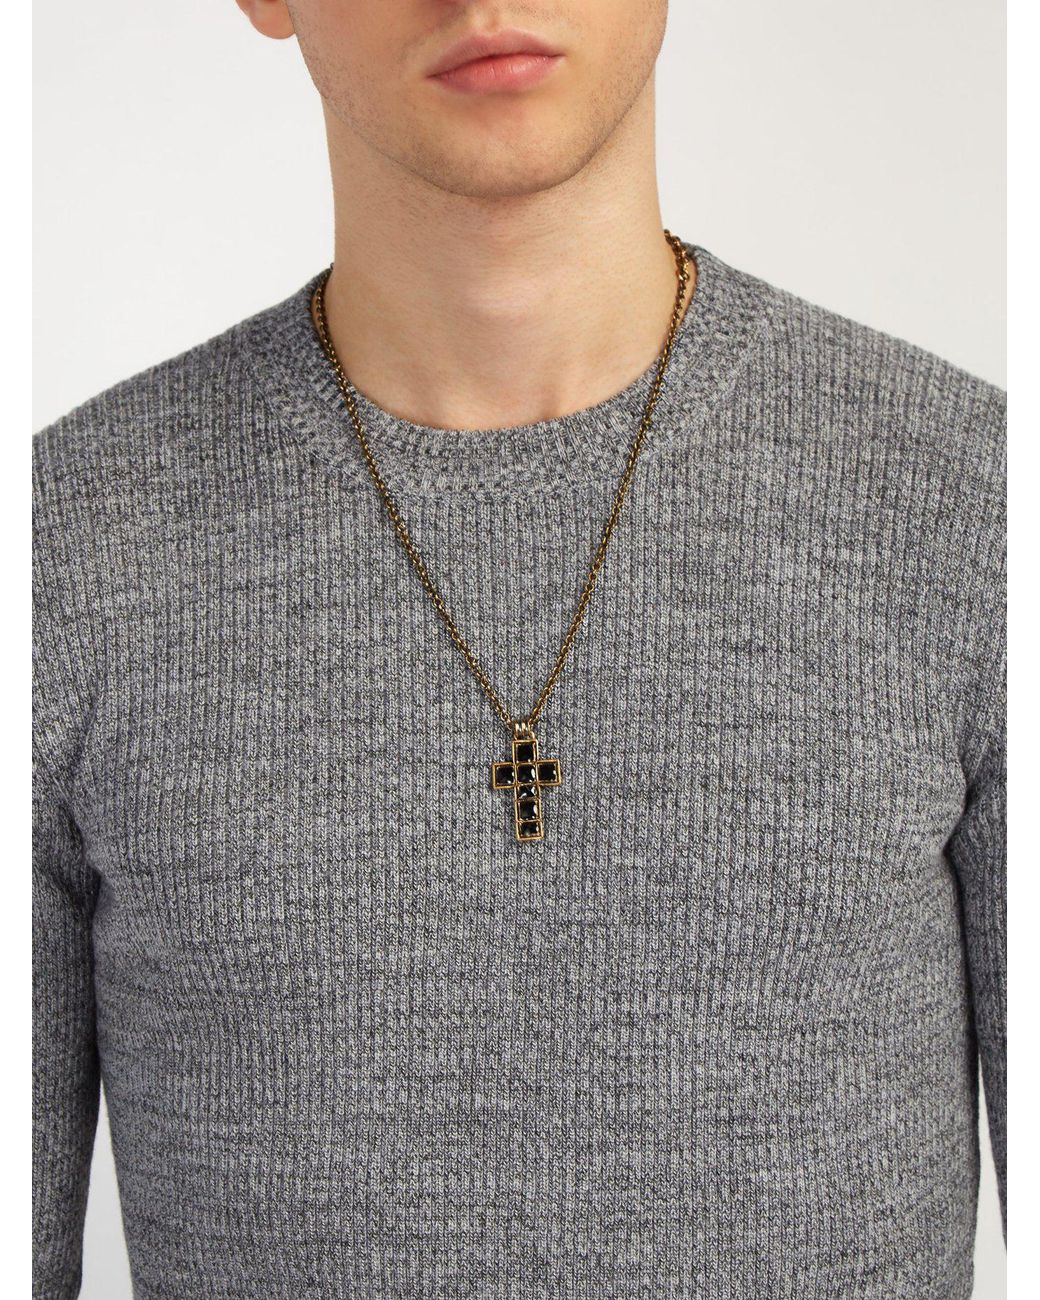 Gucci Cross Pendant Necklace in Black for Men | Lyst